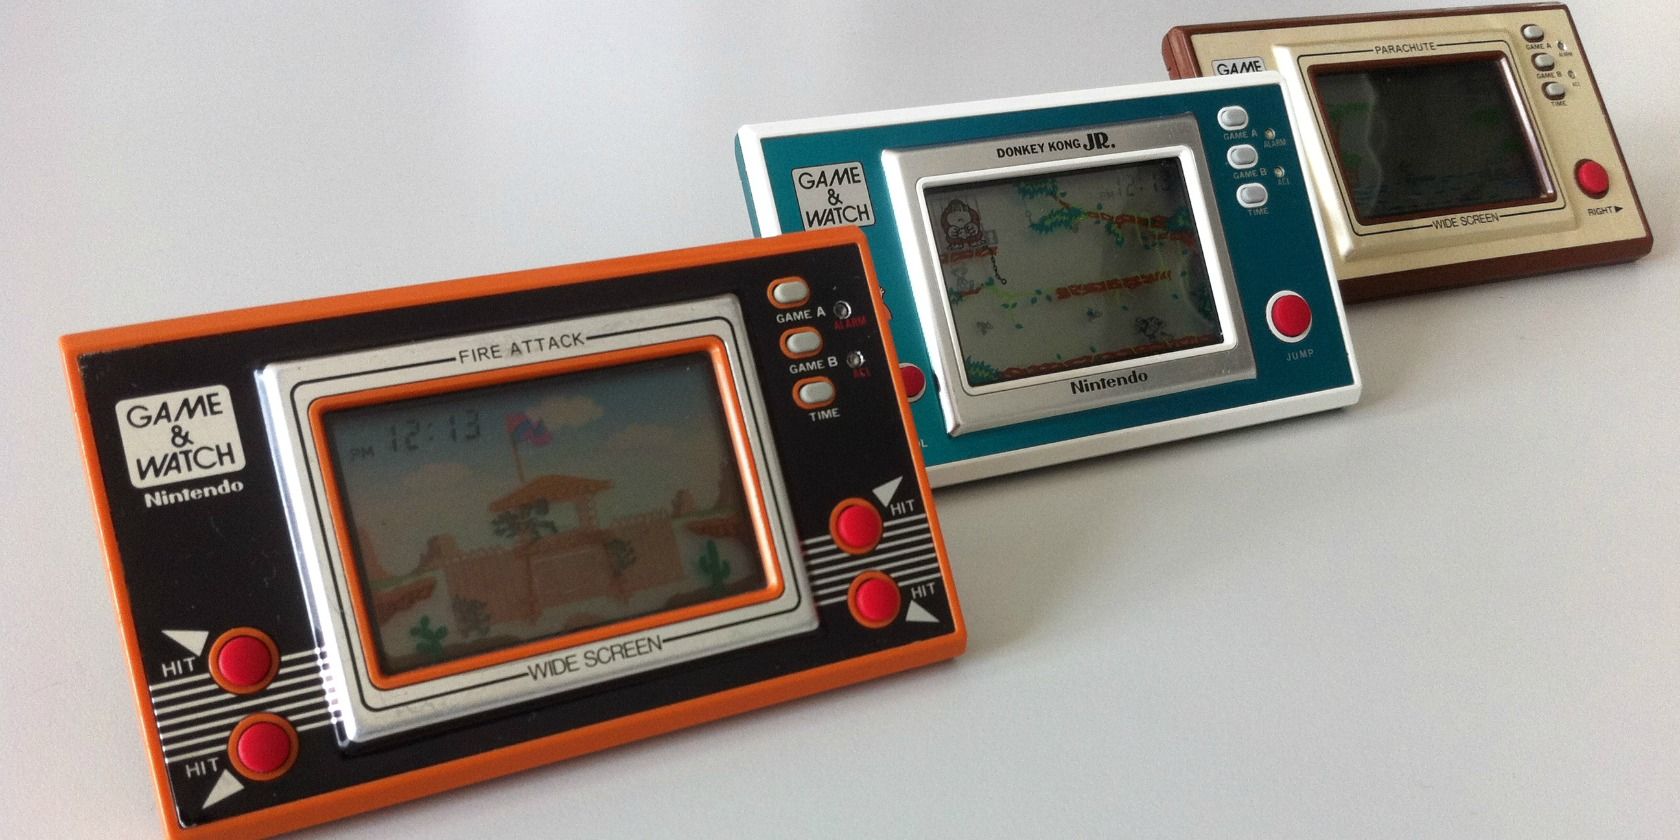 Pica Pic Brings Classic Handheld Electronic Games To The Web